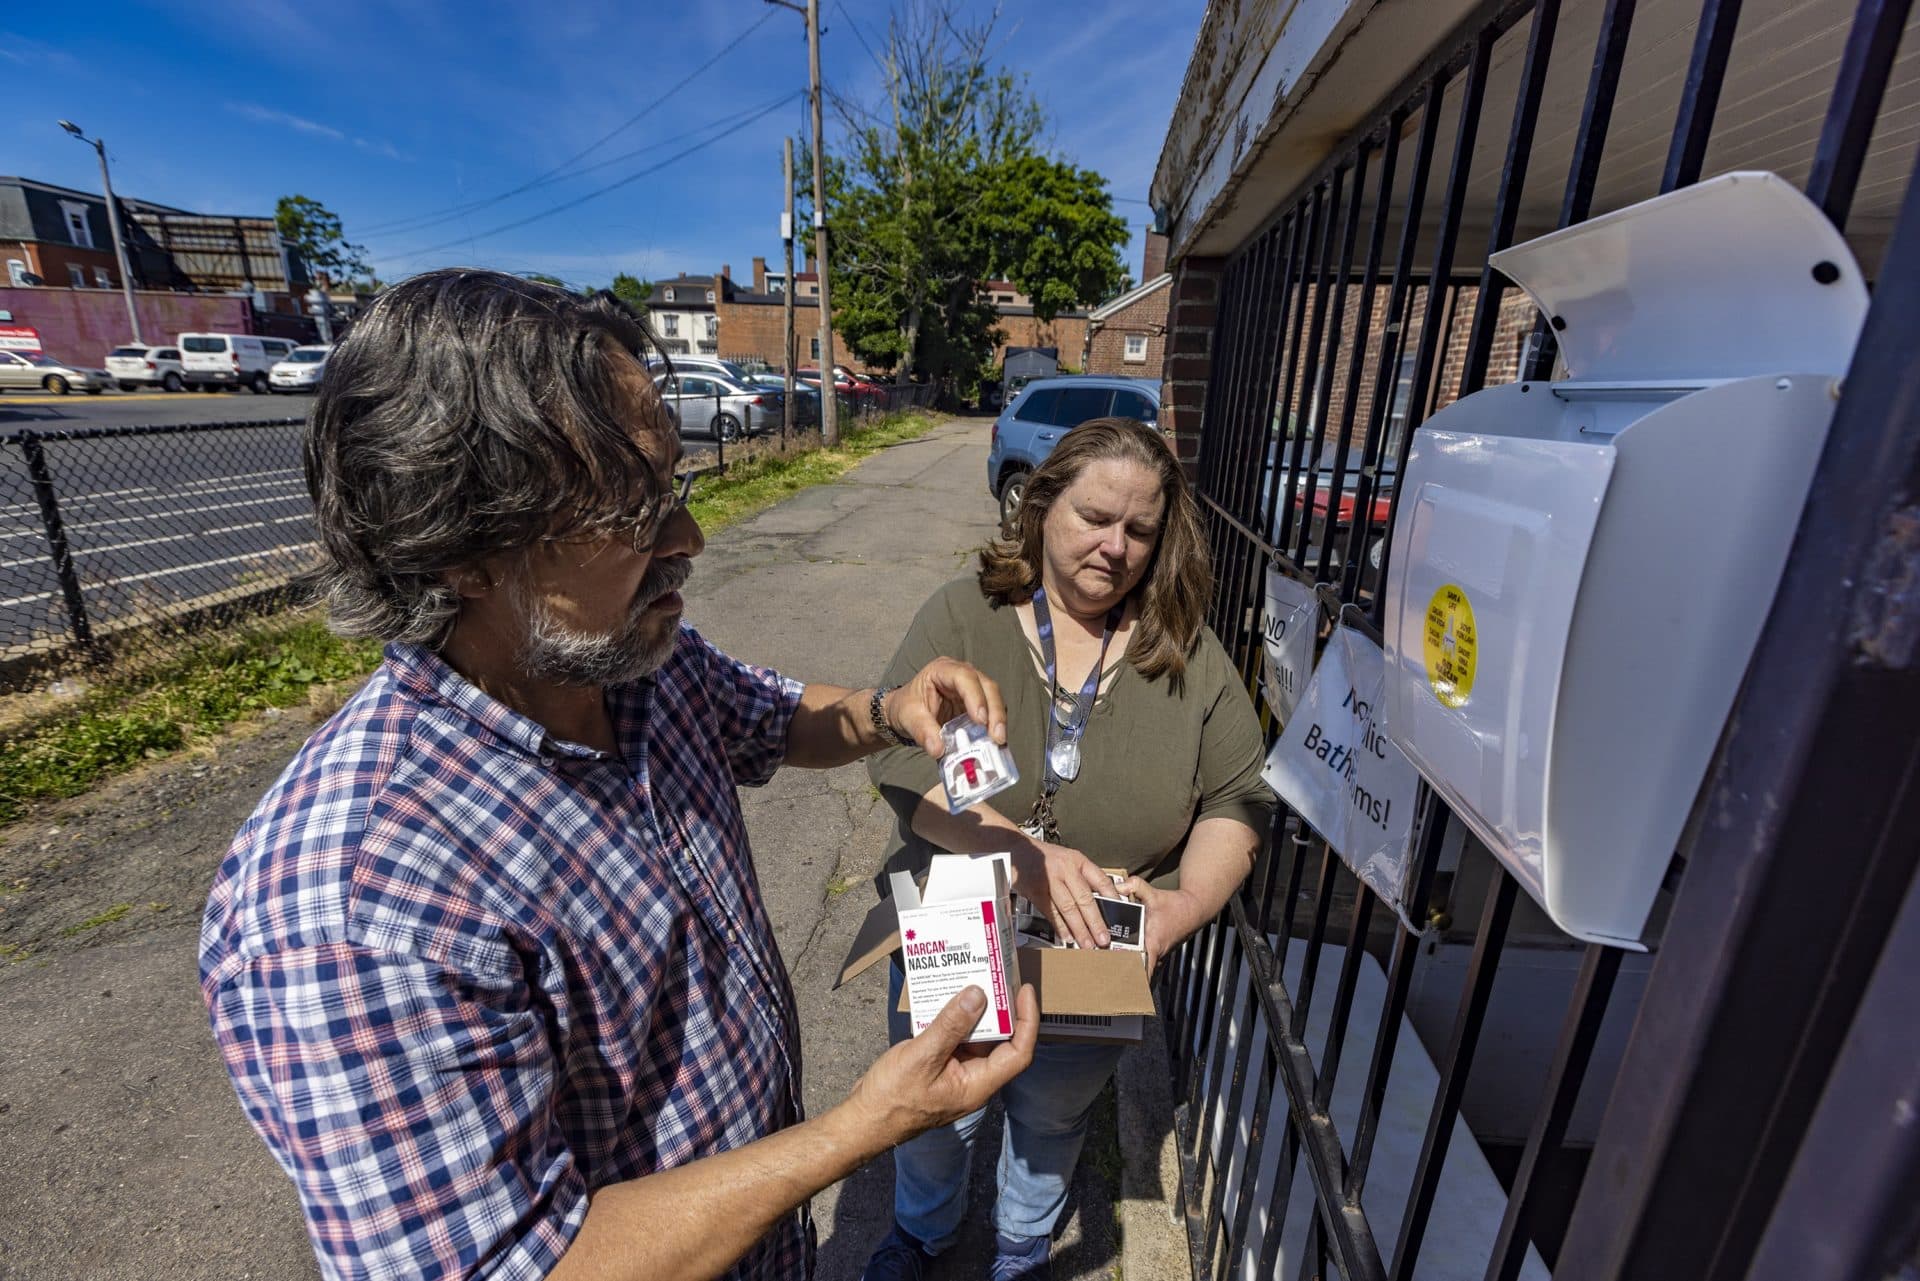 Pastor Roberto Silveira and Judy Gustafson, both with the Universal Missionary Church, regularly fill a church mailbox with naloxone for anyone to take. (Jesse Costa/WBUR)